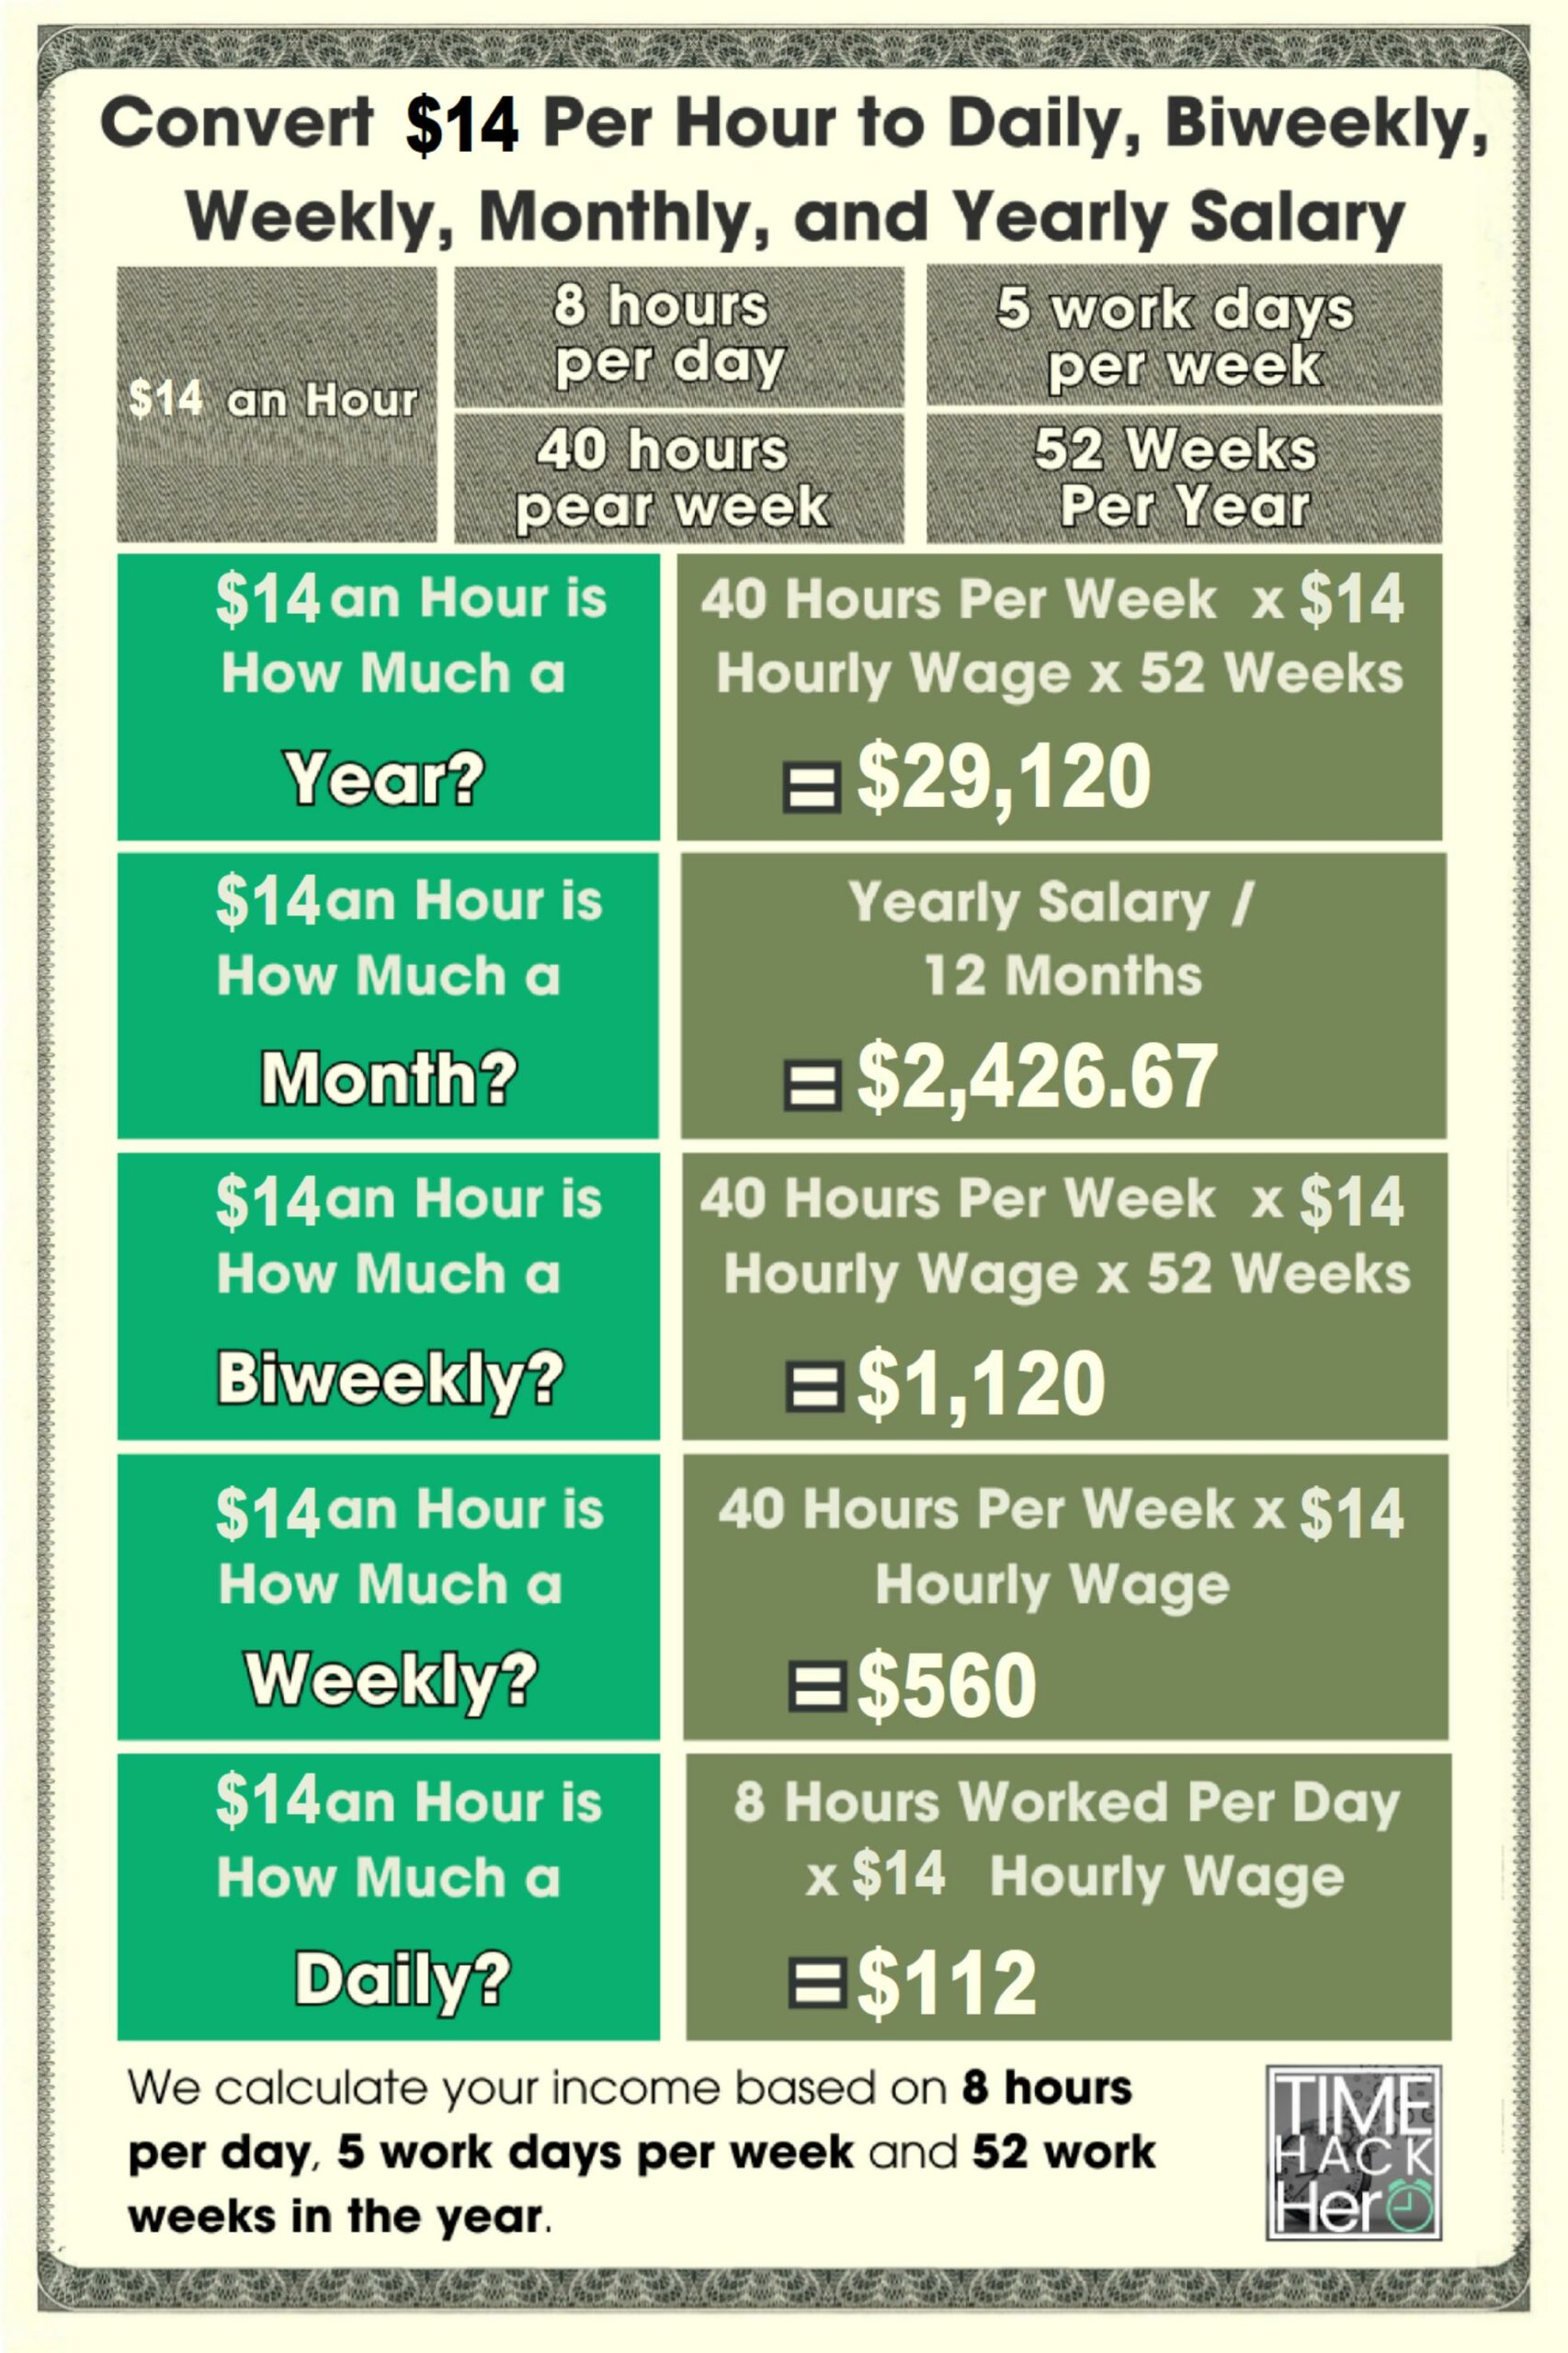 Convert $14 Per Hour to Daily, Biweekly, Weekly, Monthly, and Yearly Salary